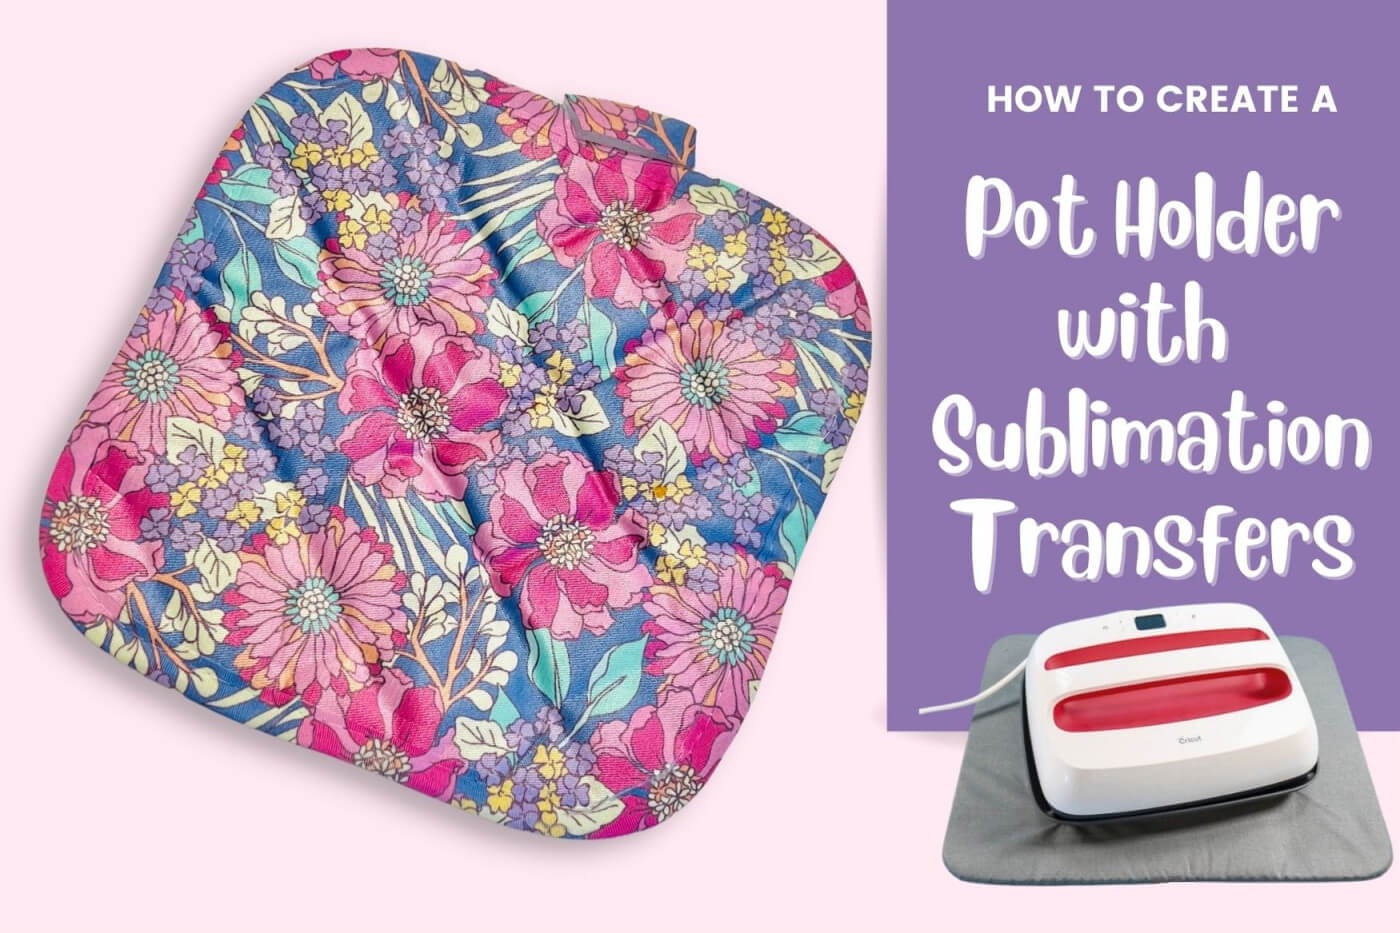 How to create a Pot Holder with Sublimation Transfers